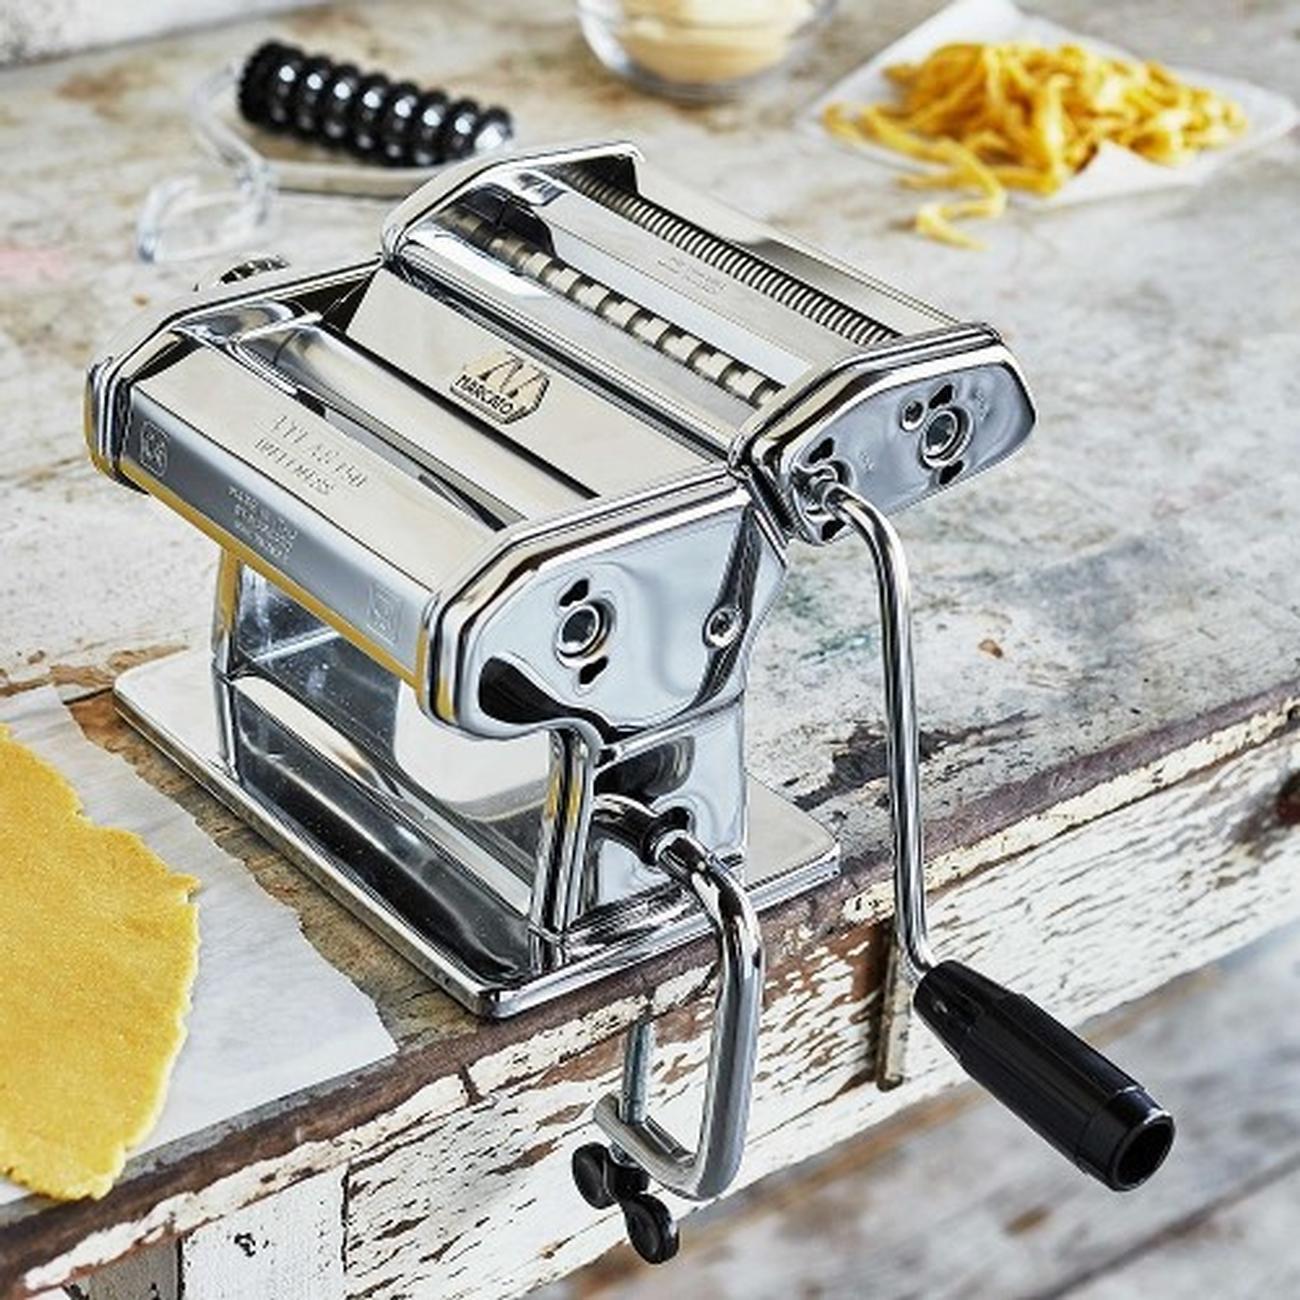 https://www.thekitchenwhisk.ie/contentfiles/productImages/Large/Marcato-Atlas-150-Classic-Pasta-Maker-lifestyle-2.jpg